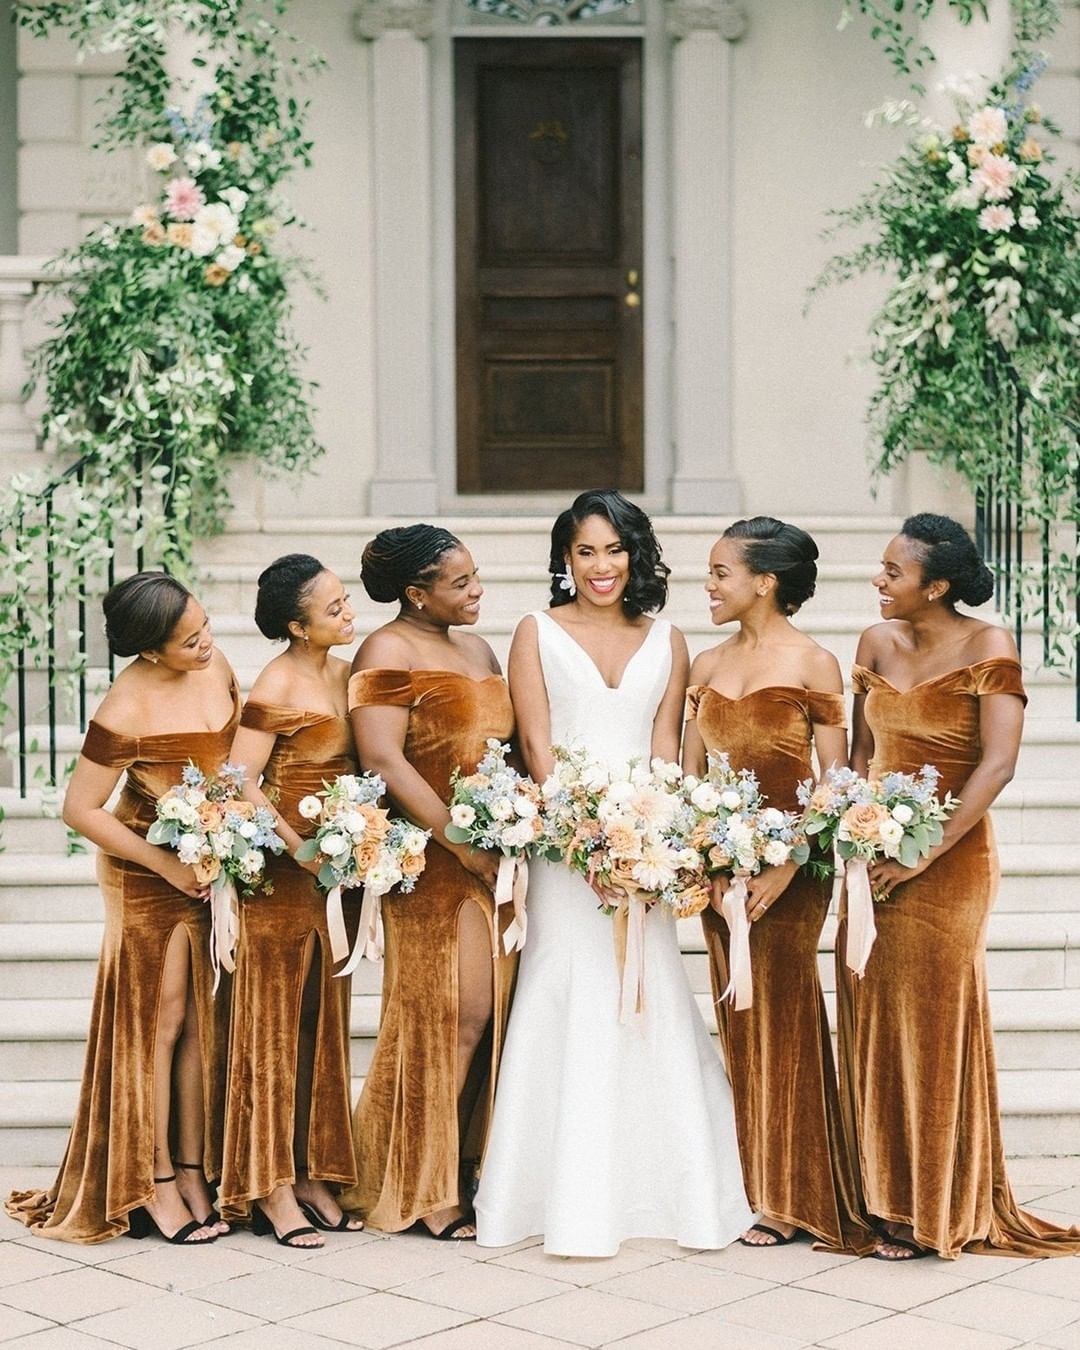 These Are the Winter Wedding Trends We're Seeing Everywhere008